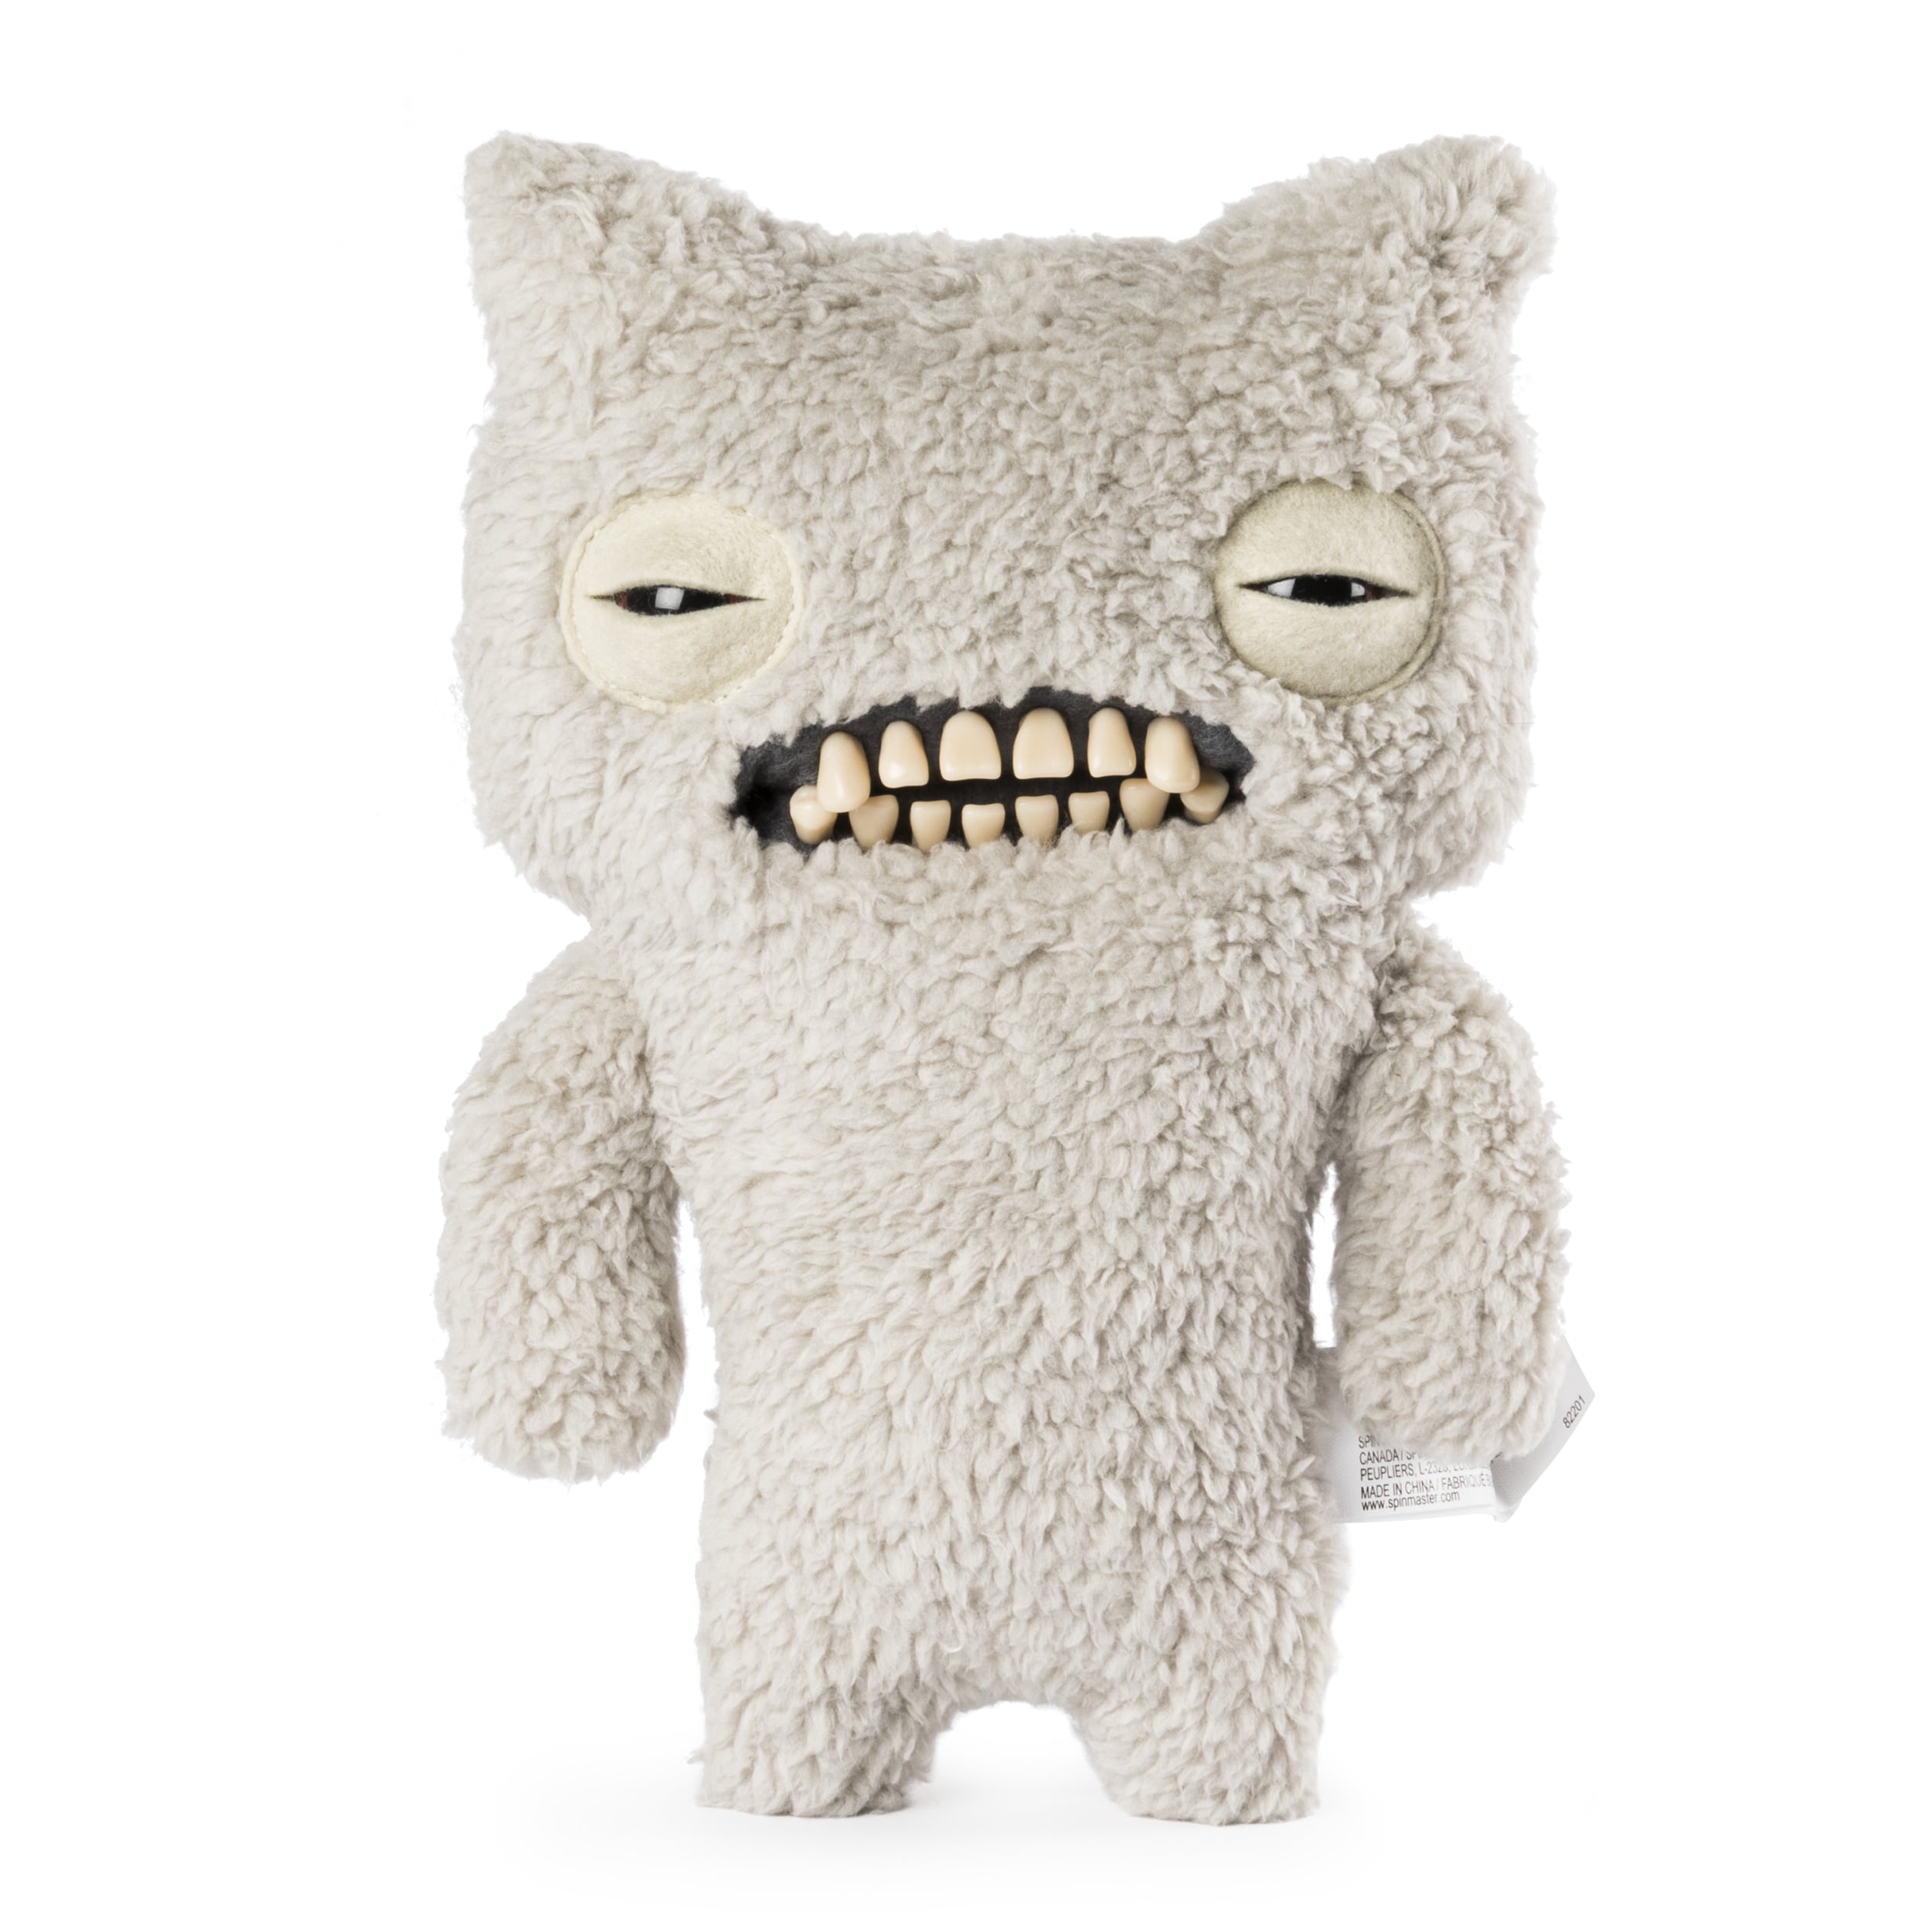 Fuggler – Funny Ugly Monster, 9” Munch Munch (Fuzzy Grey) Plush Creature  with Teeth, for Ages 4 and Up 